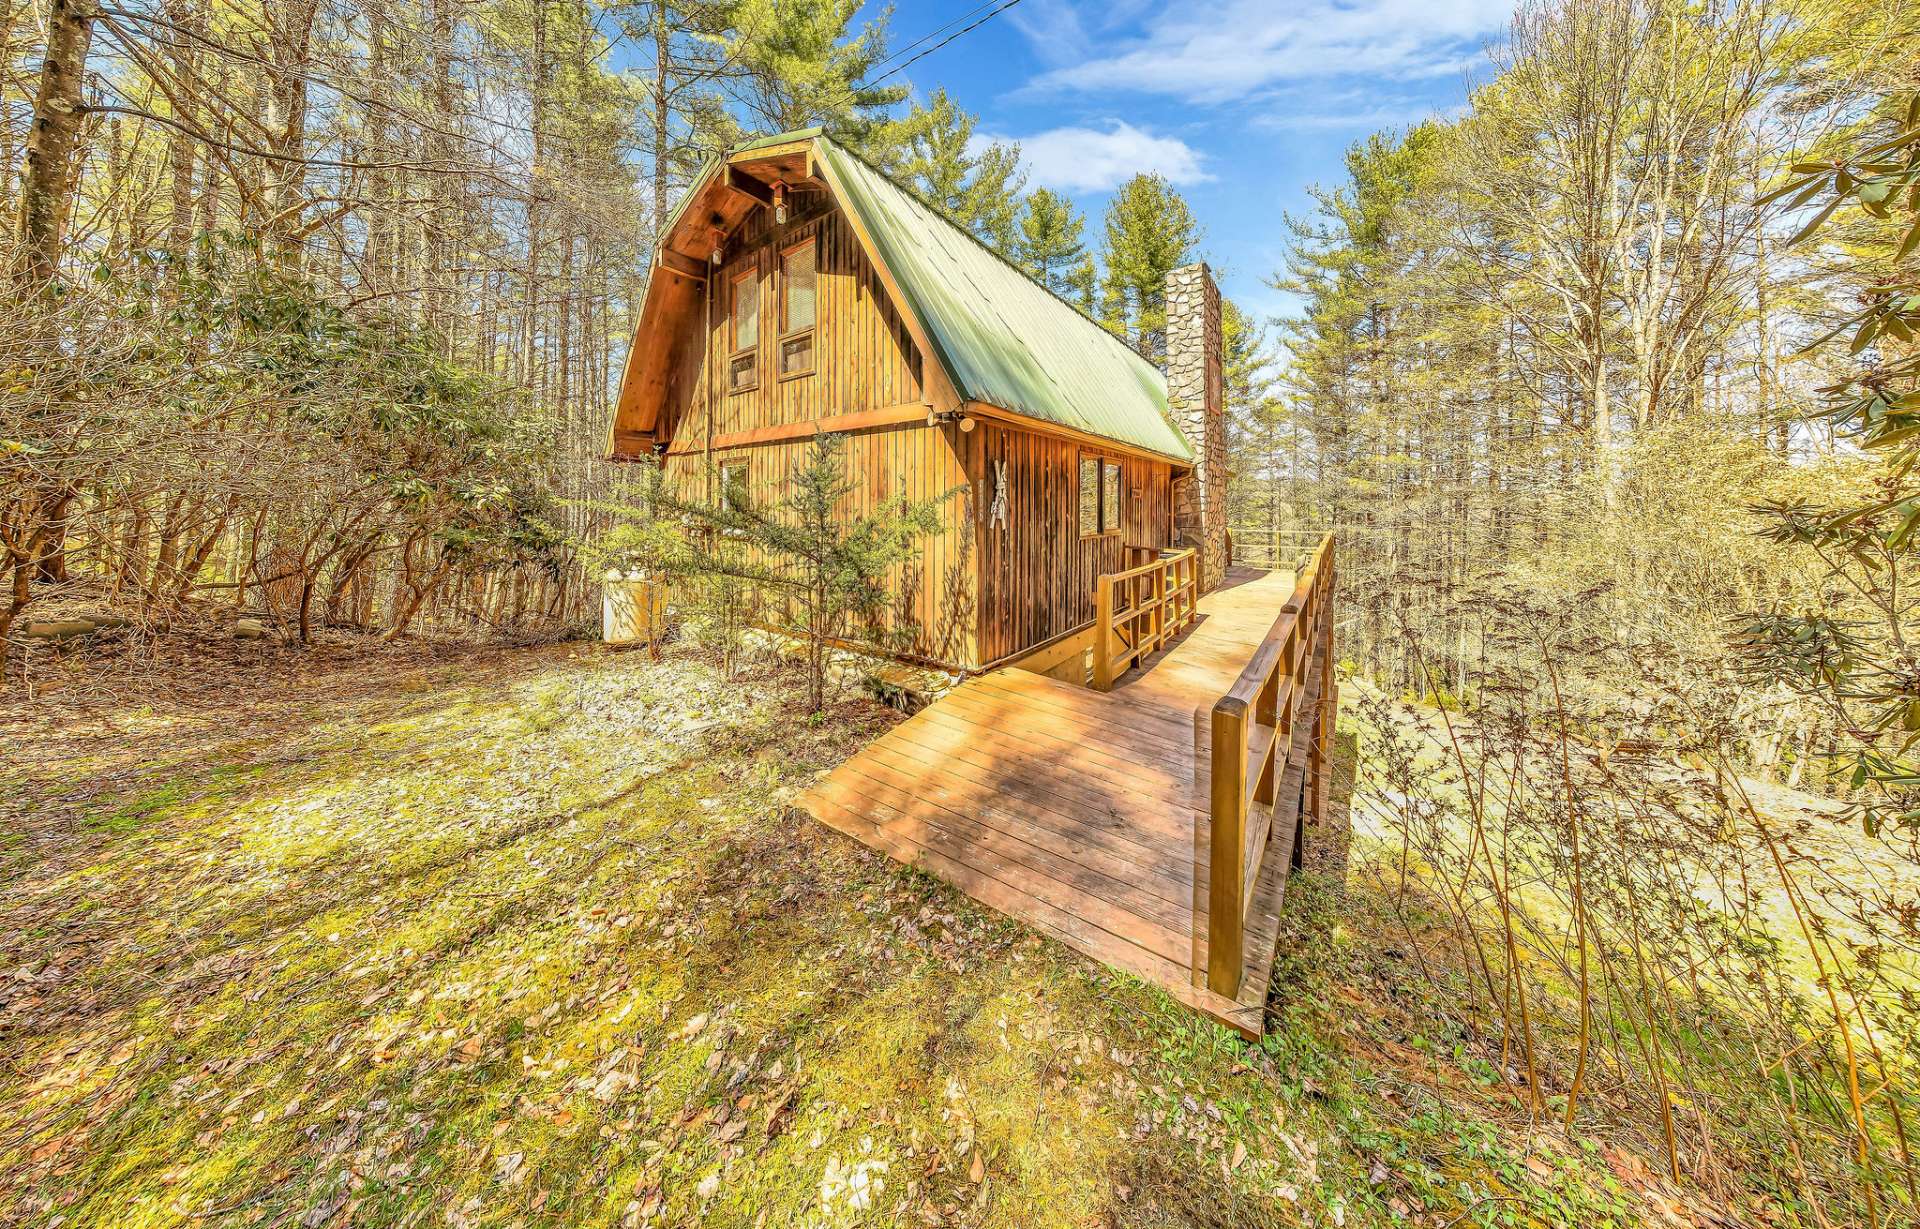 You will love the privacy this wooded setting provides.